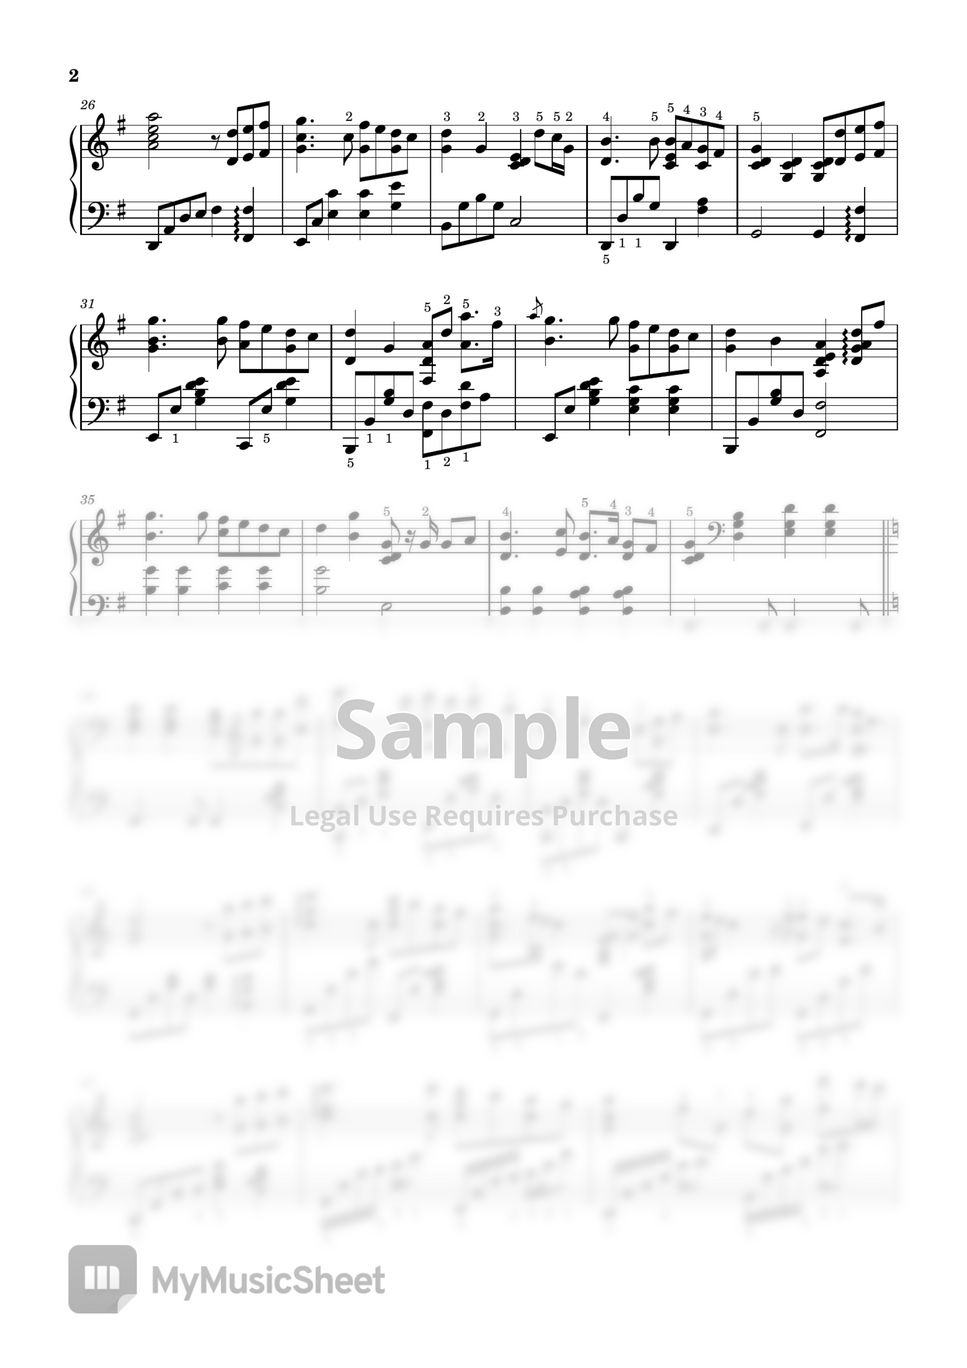 Play with me Sheet music for Piano (Solo)